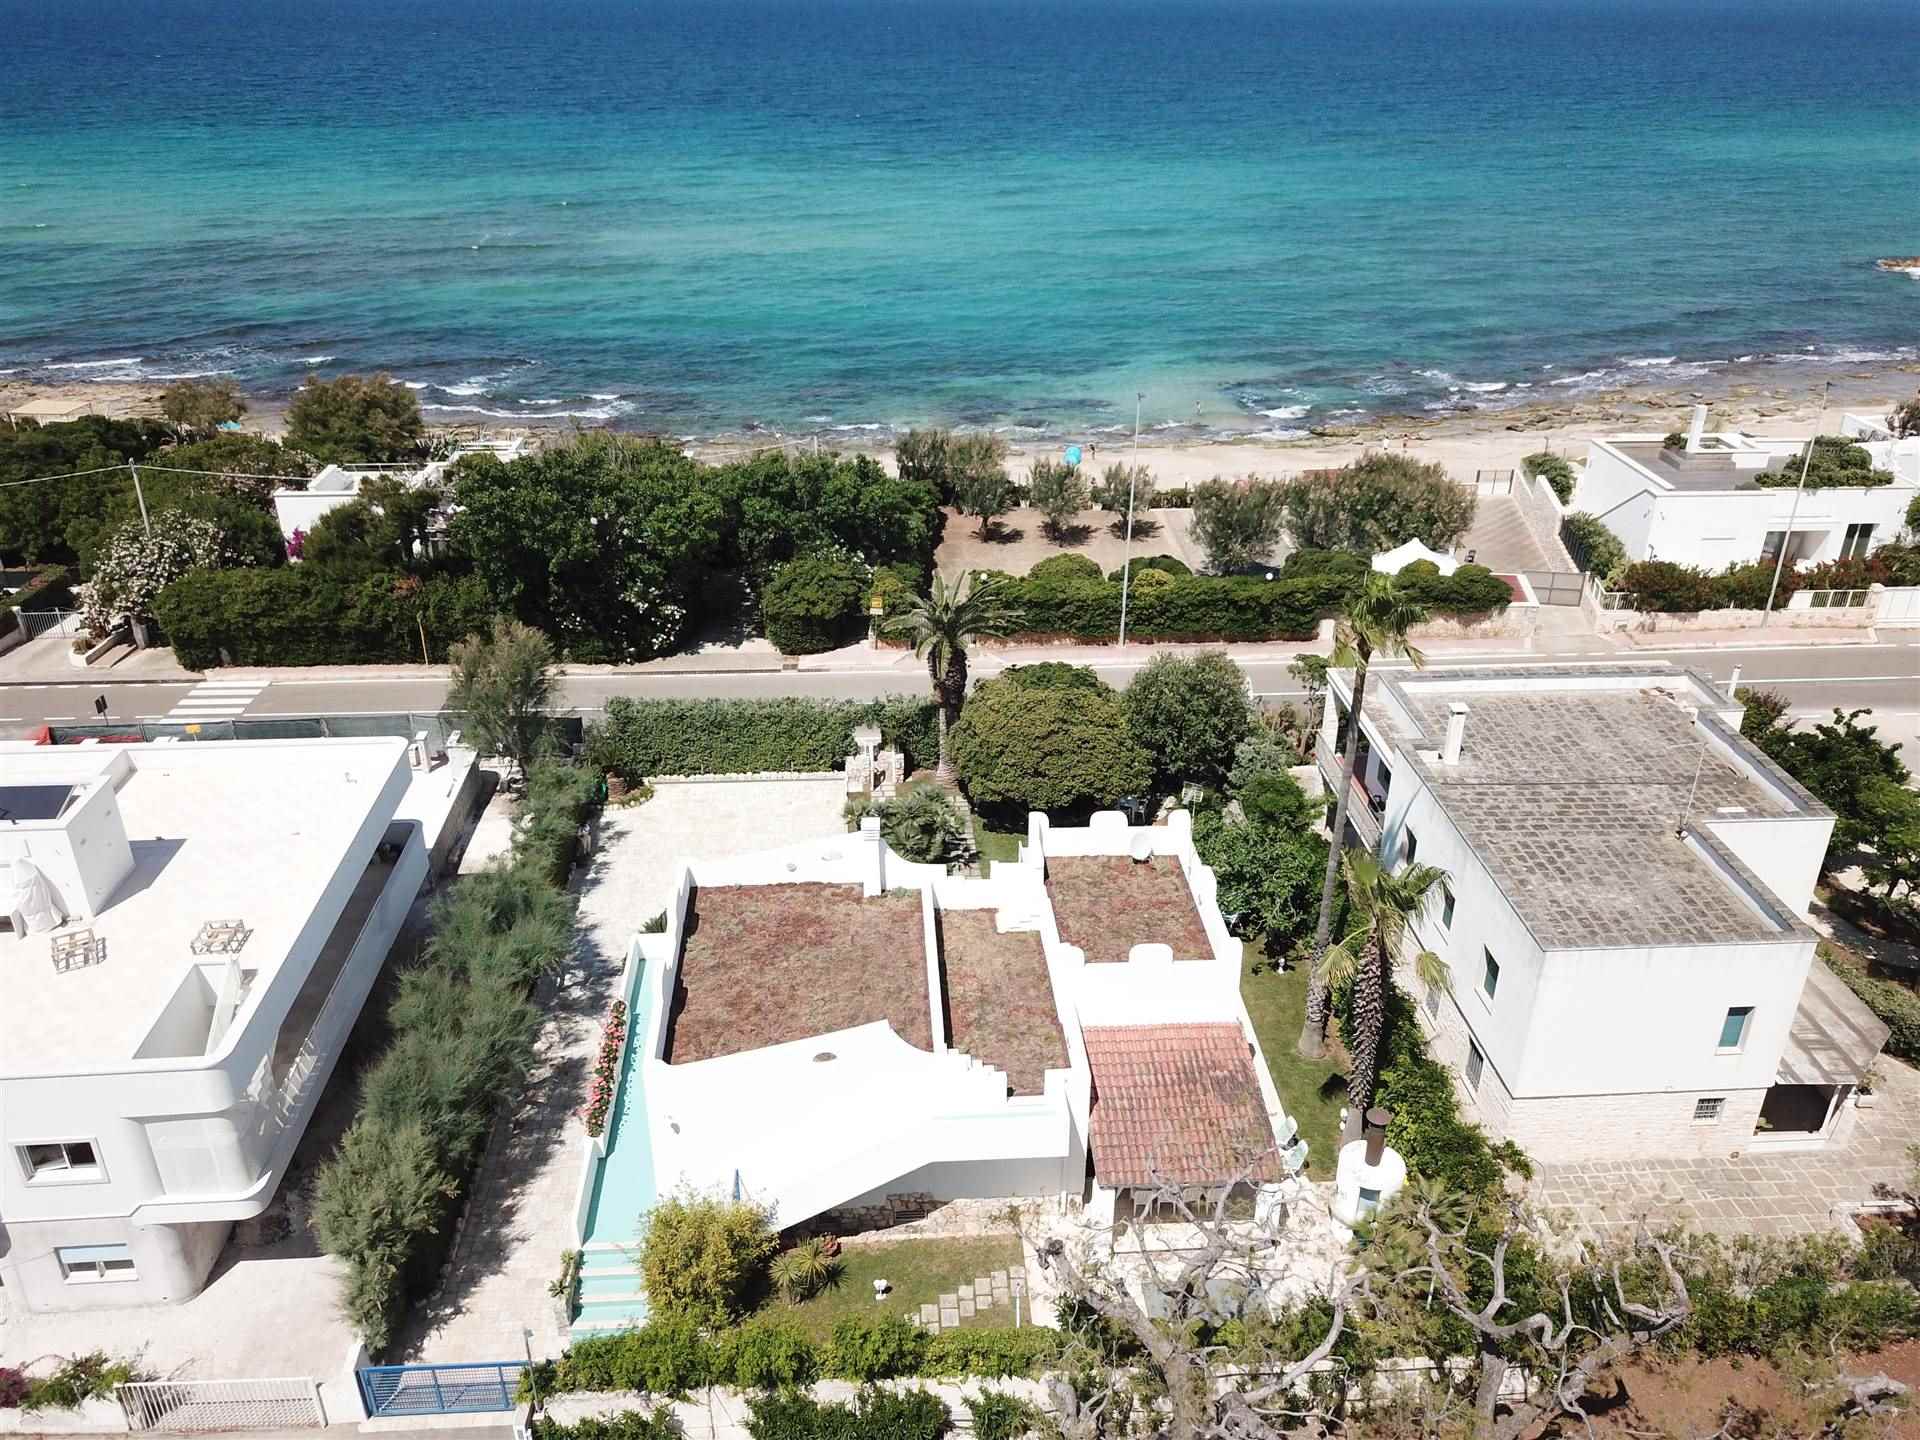 CAPITOLO, MONOPOLI, Villa for sale of 100 Sq. mt., Excellent Condition, Heating Individual heating system, Energetic class: G, Epi: 165 kwh/m2 year, placed at Raised, composed by: 5 Rooms, Separate 